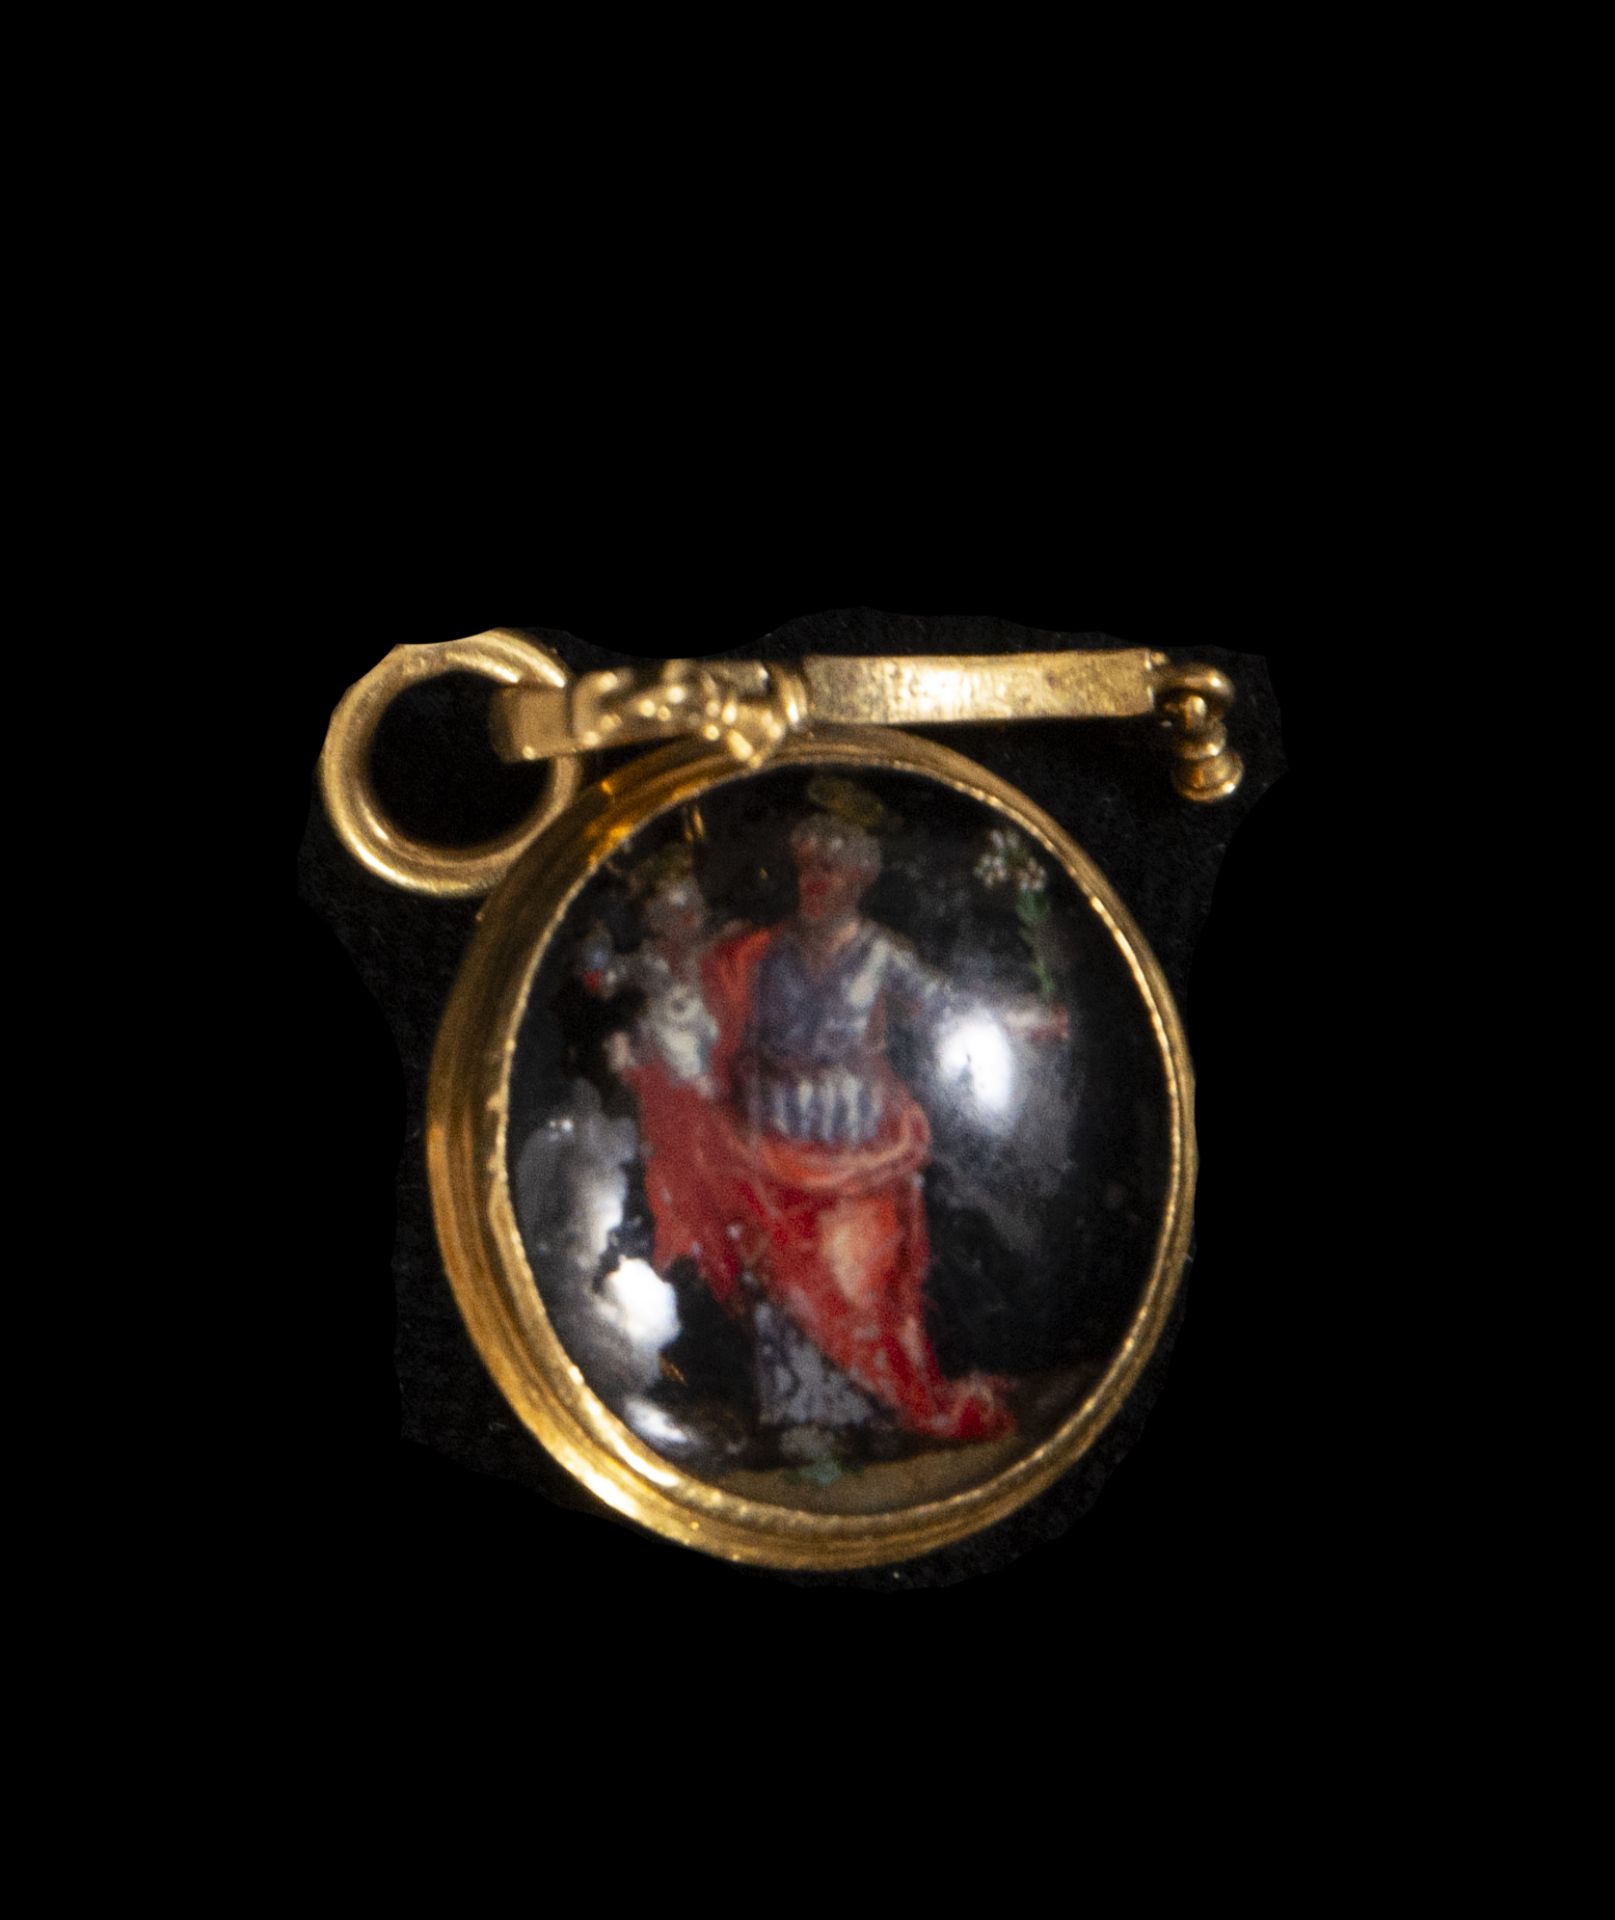 Exquisite double-sided Italian hanging reliquary medallion mounted in high purity 20k gold, Italian 